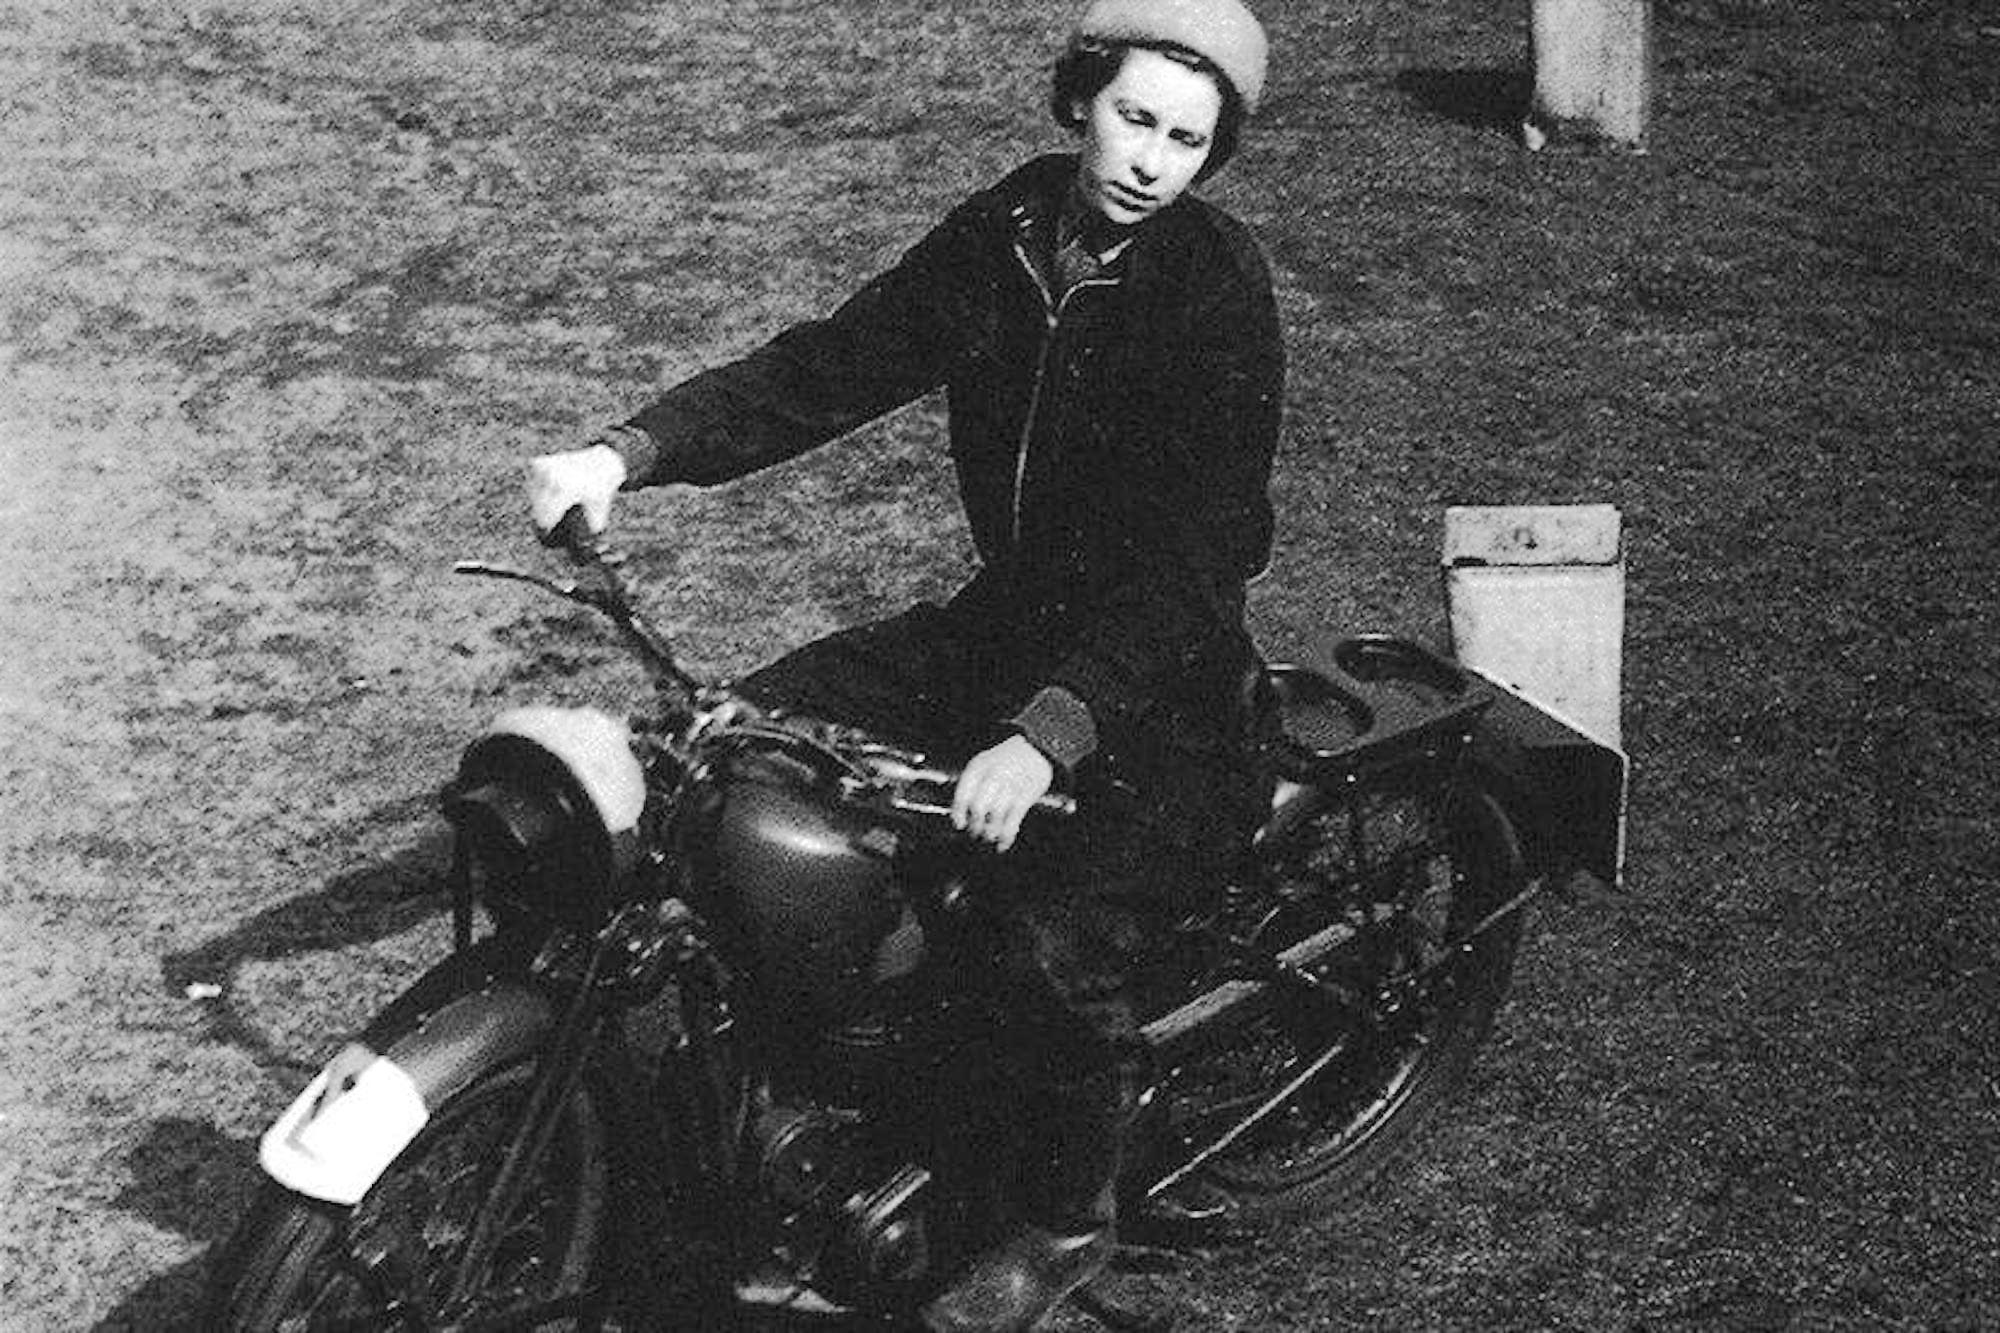 HM Princess Elizabeth on a BSA (some say Royal Enfield) motorcycle. Media sourced from Bike Sales.